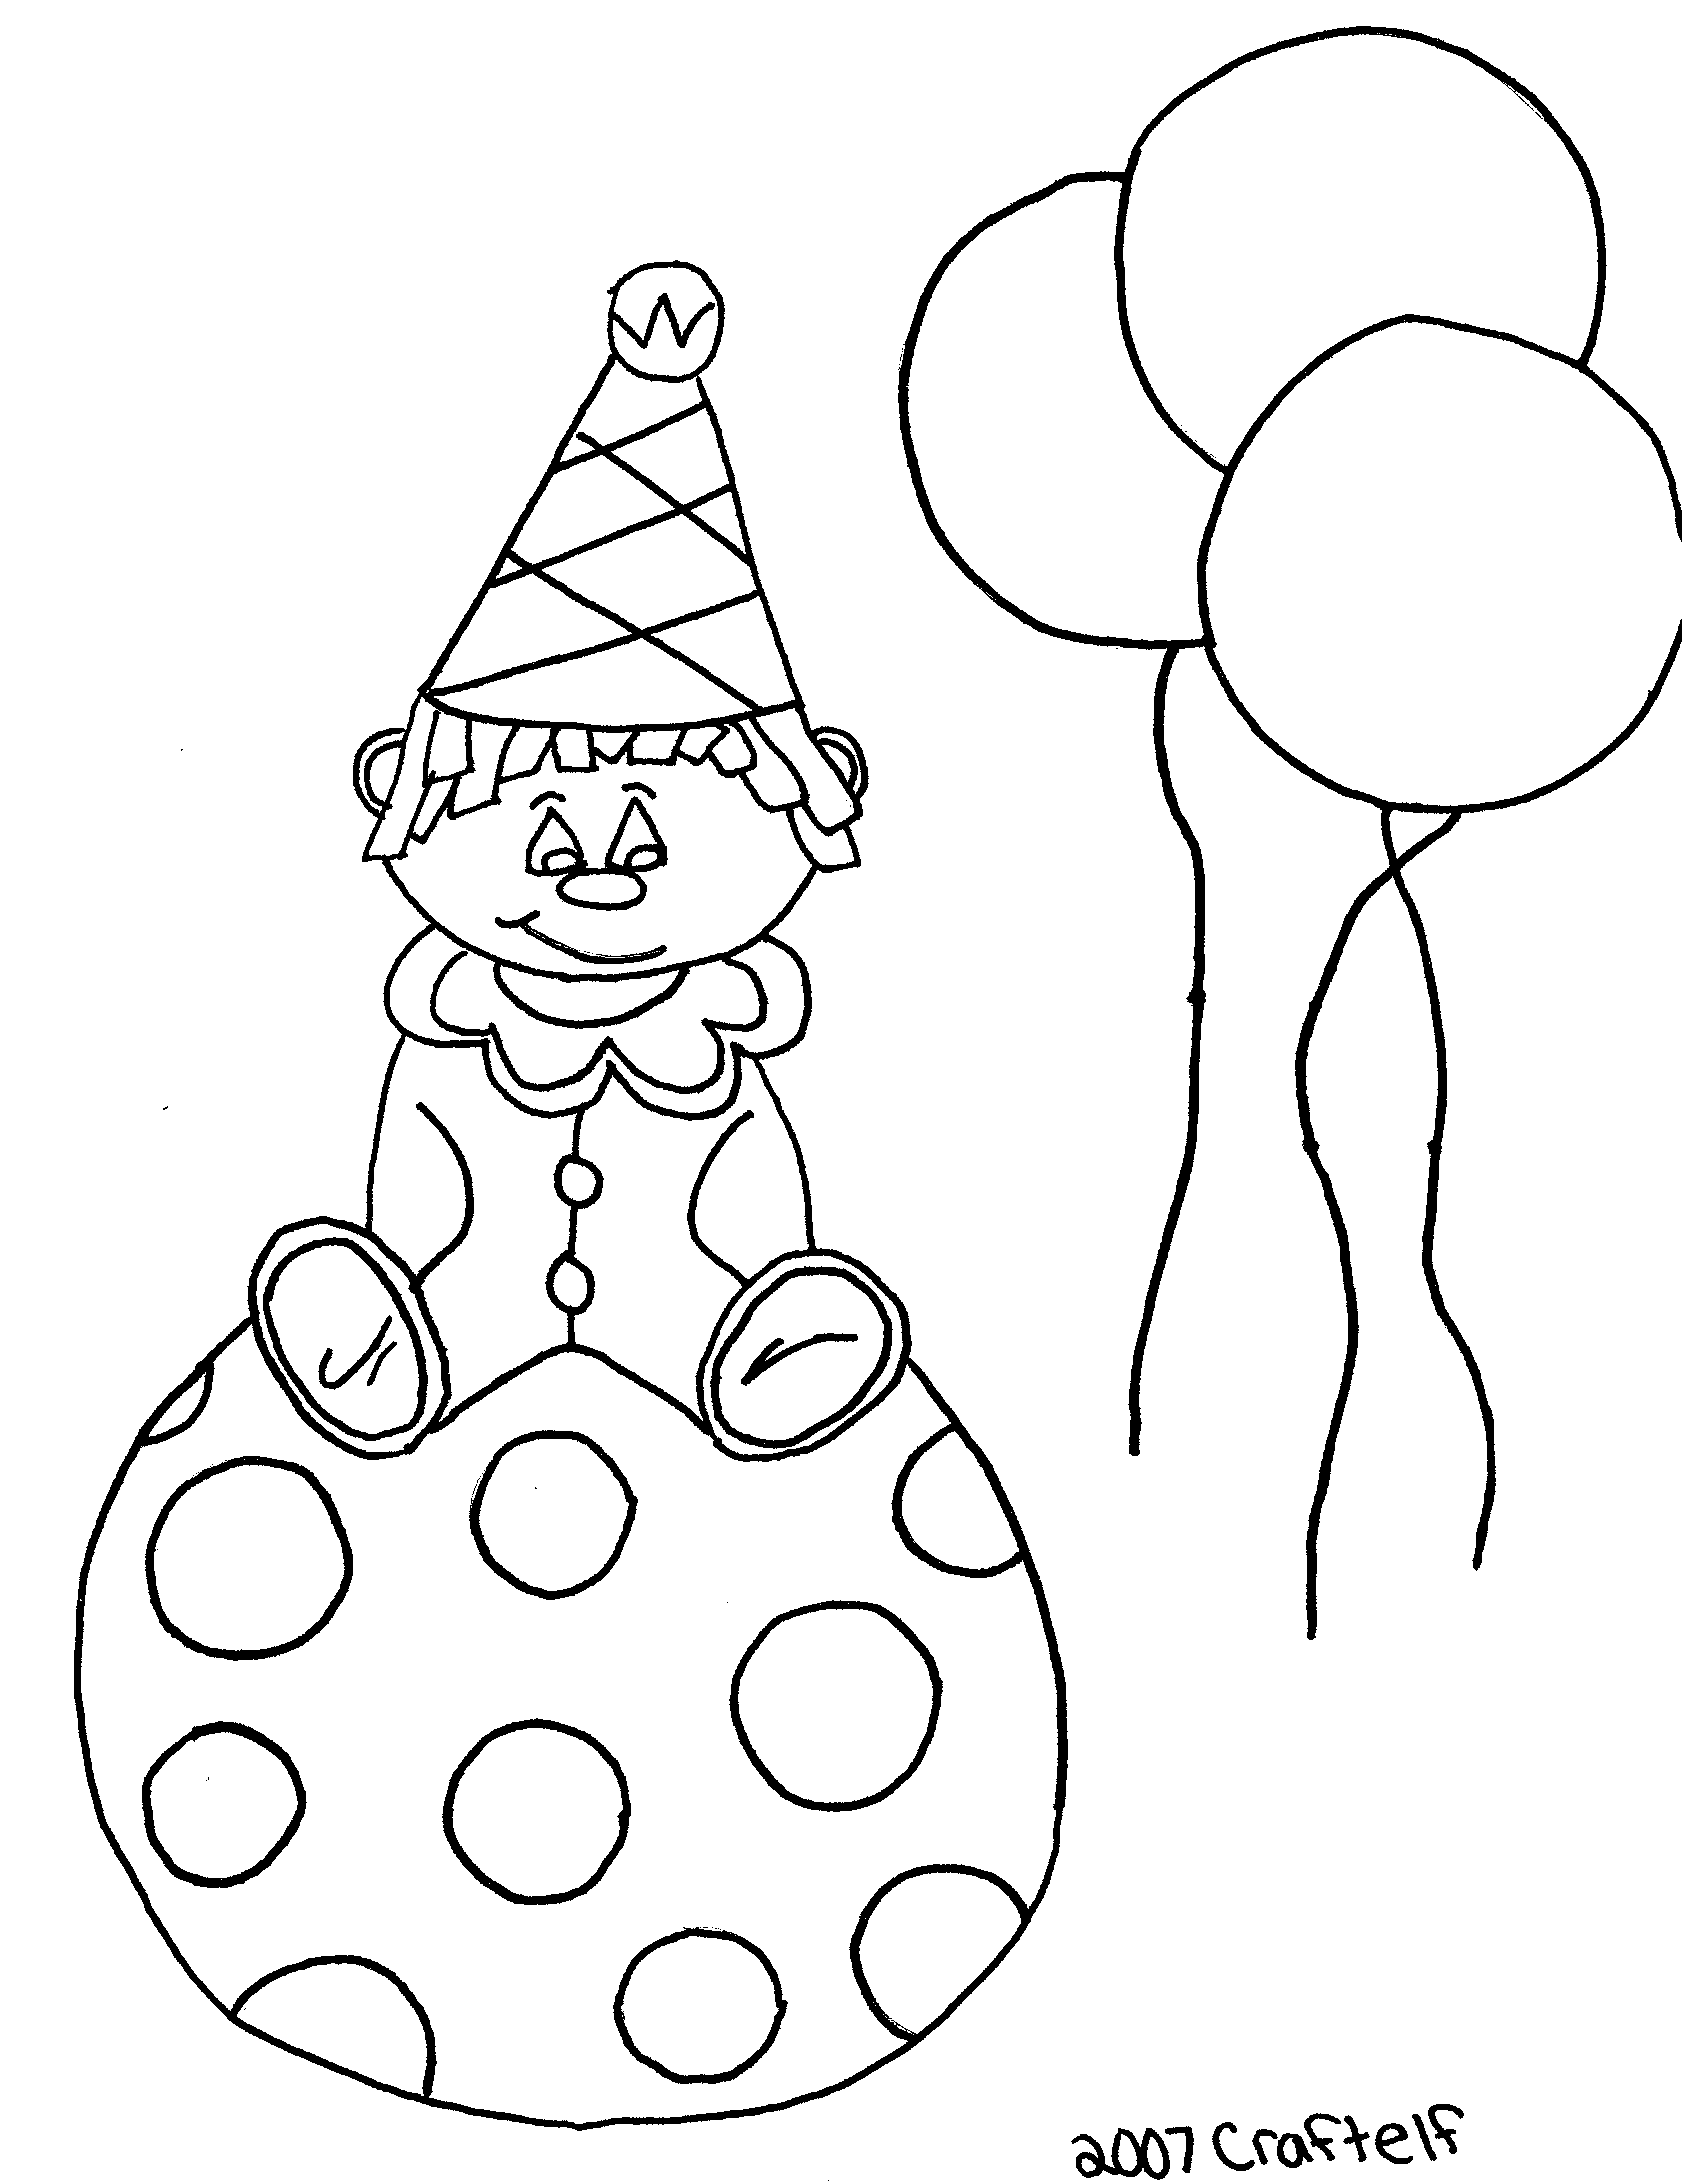 Free Clown Coloring page